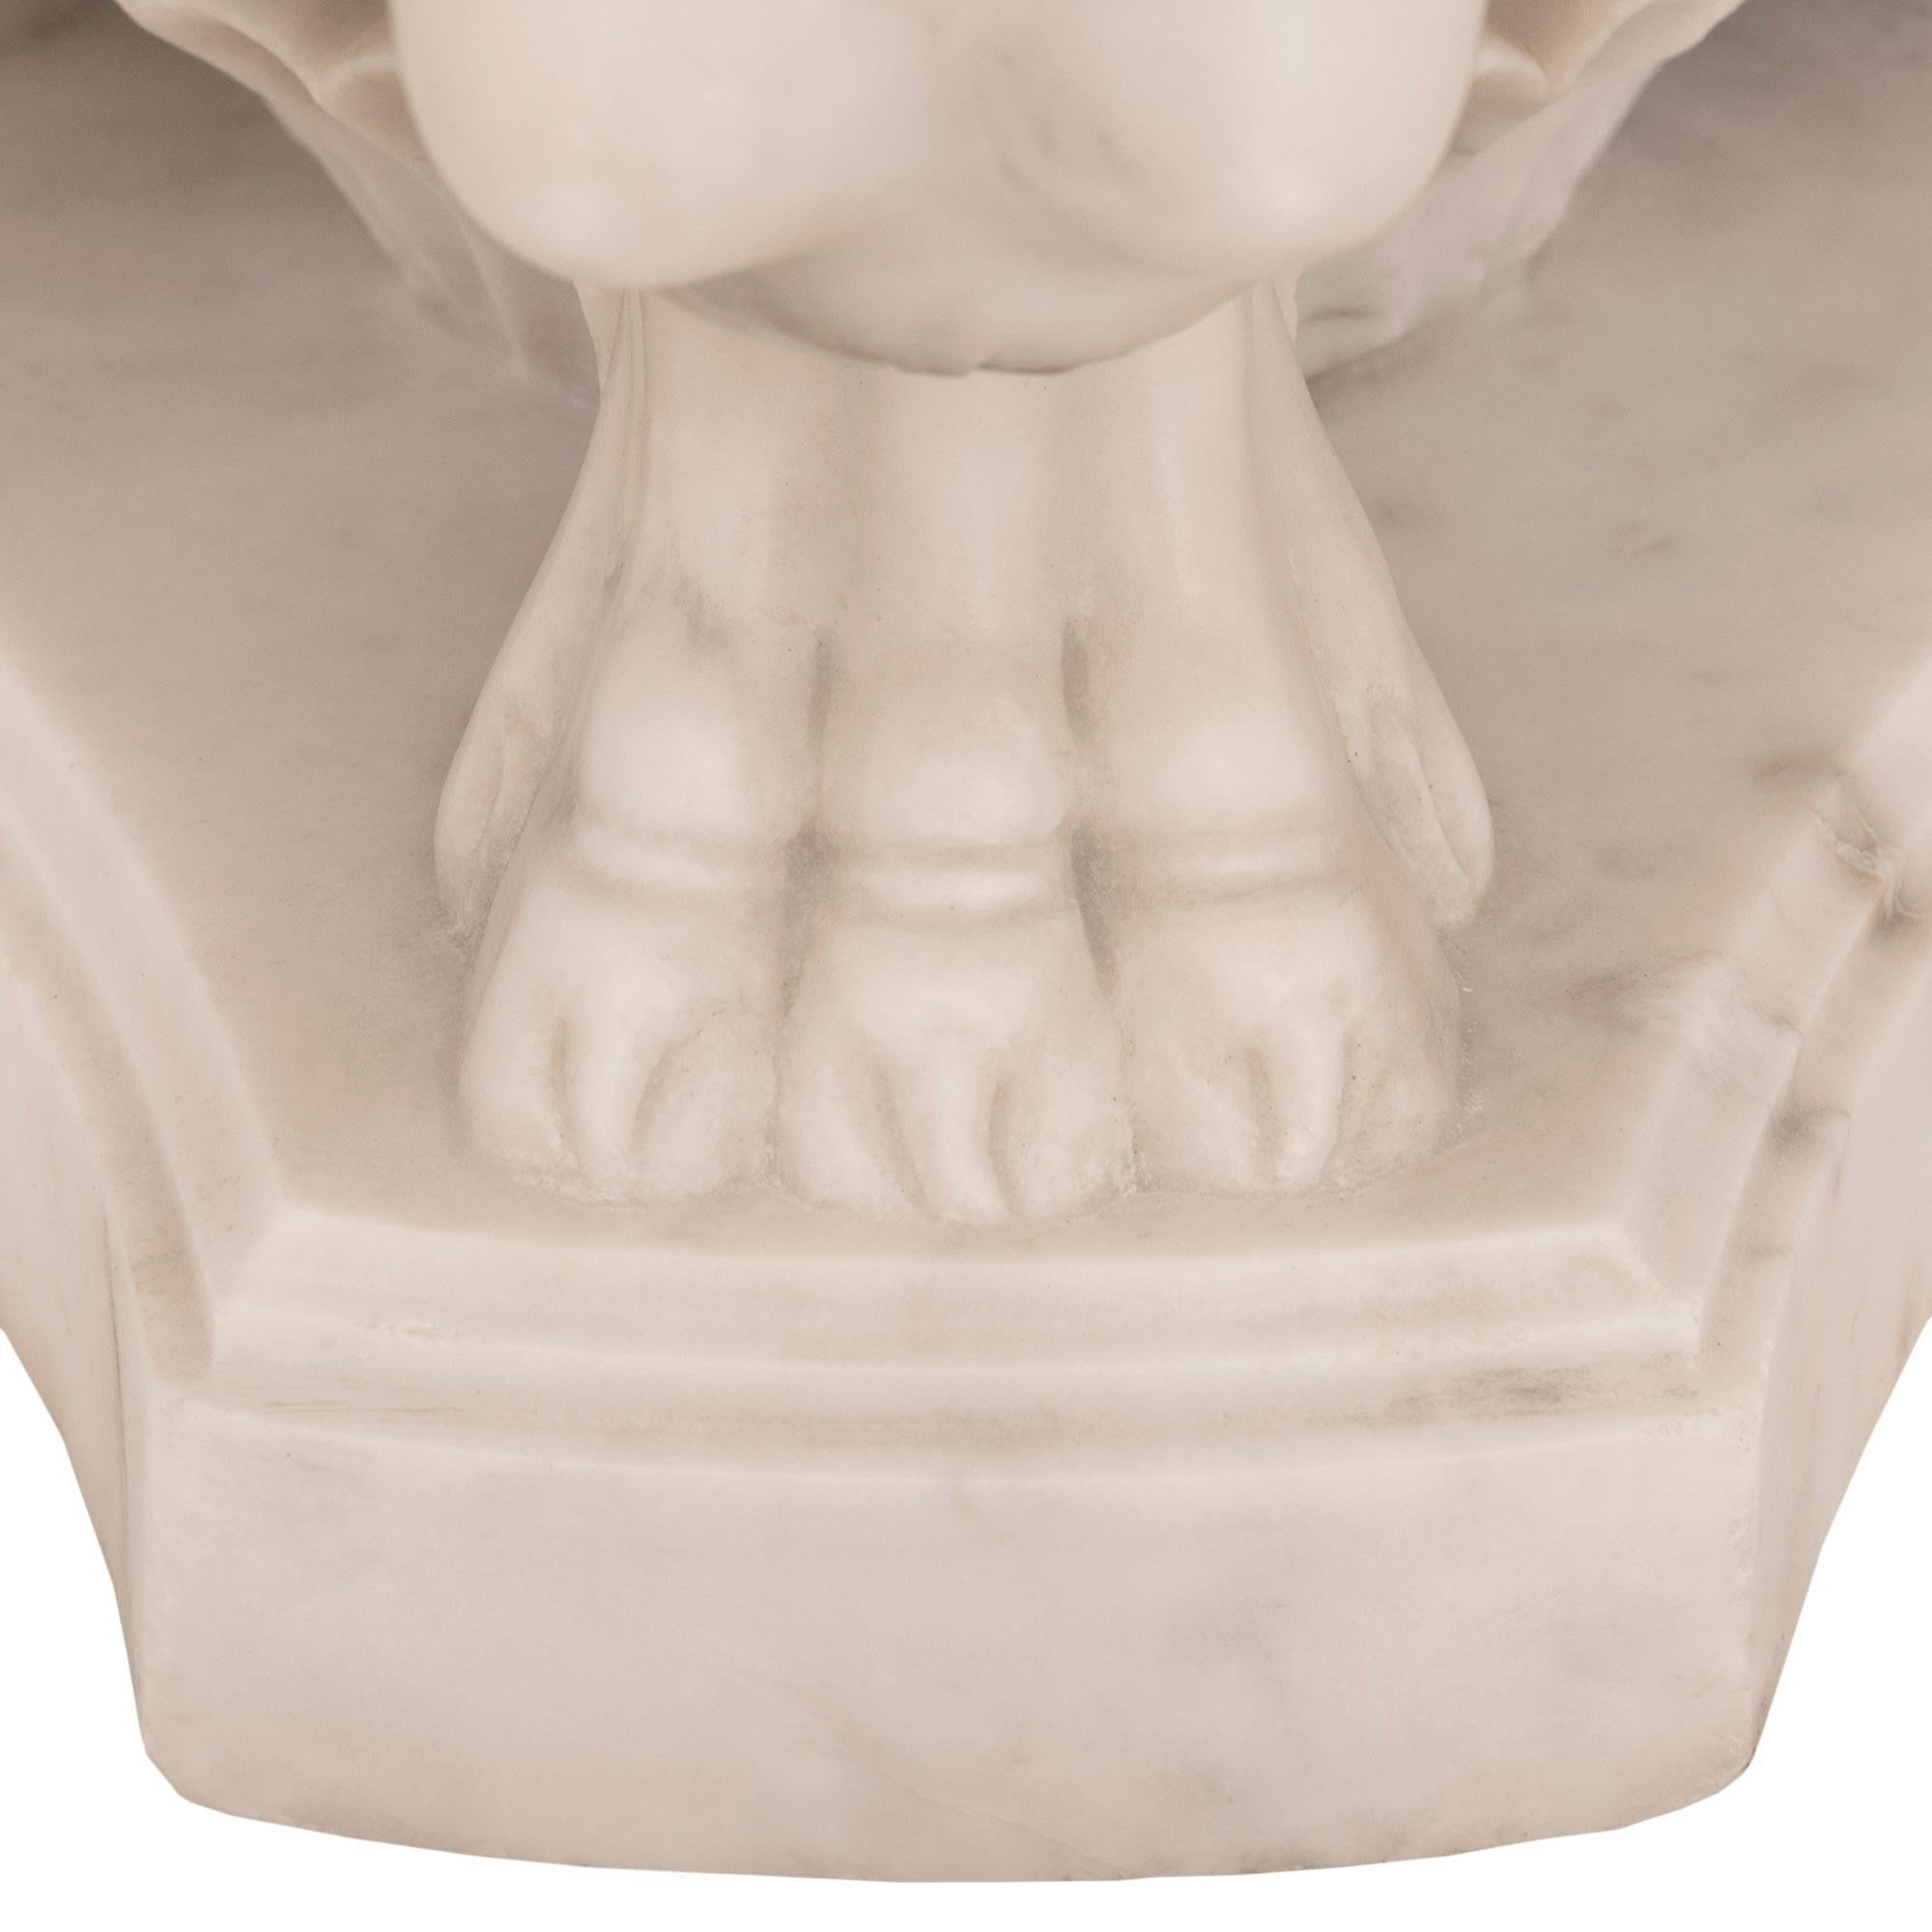 Italian 19th Century Neo-Classical St. White Carrara Marble Centerpiece Bowl For Sale 3